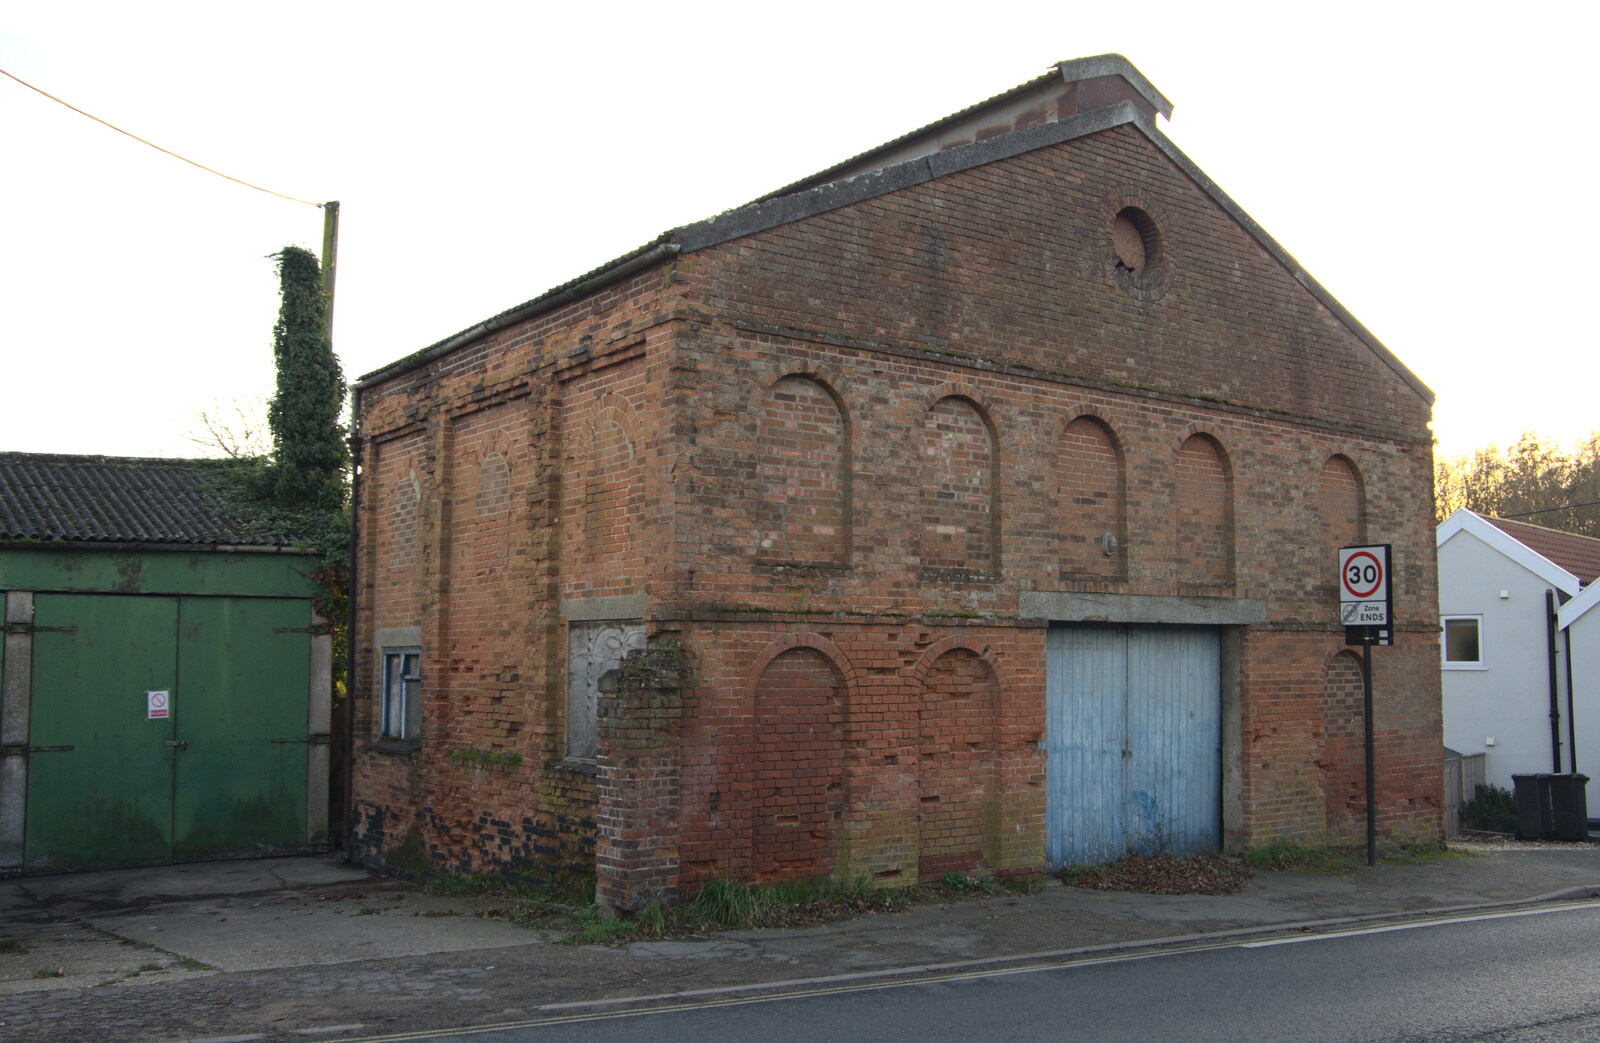 The old Town-gas Works on Magdalene Street from The Dereliction of Eye, Suffolk - 22nd November 2020